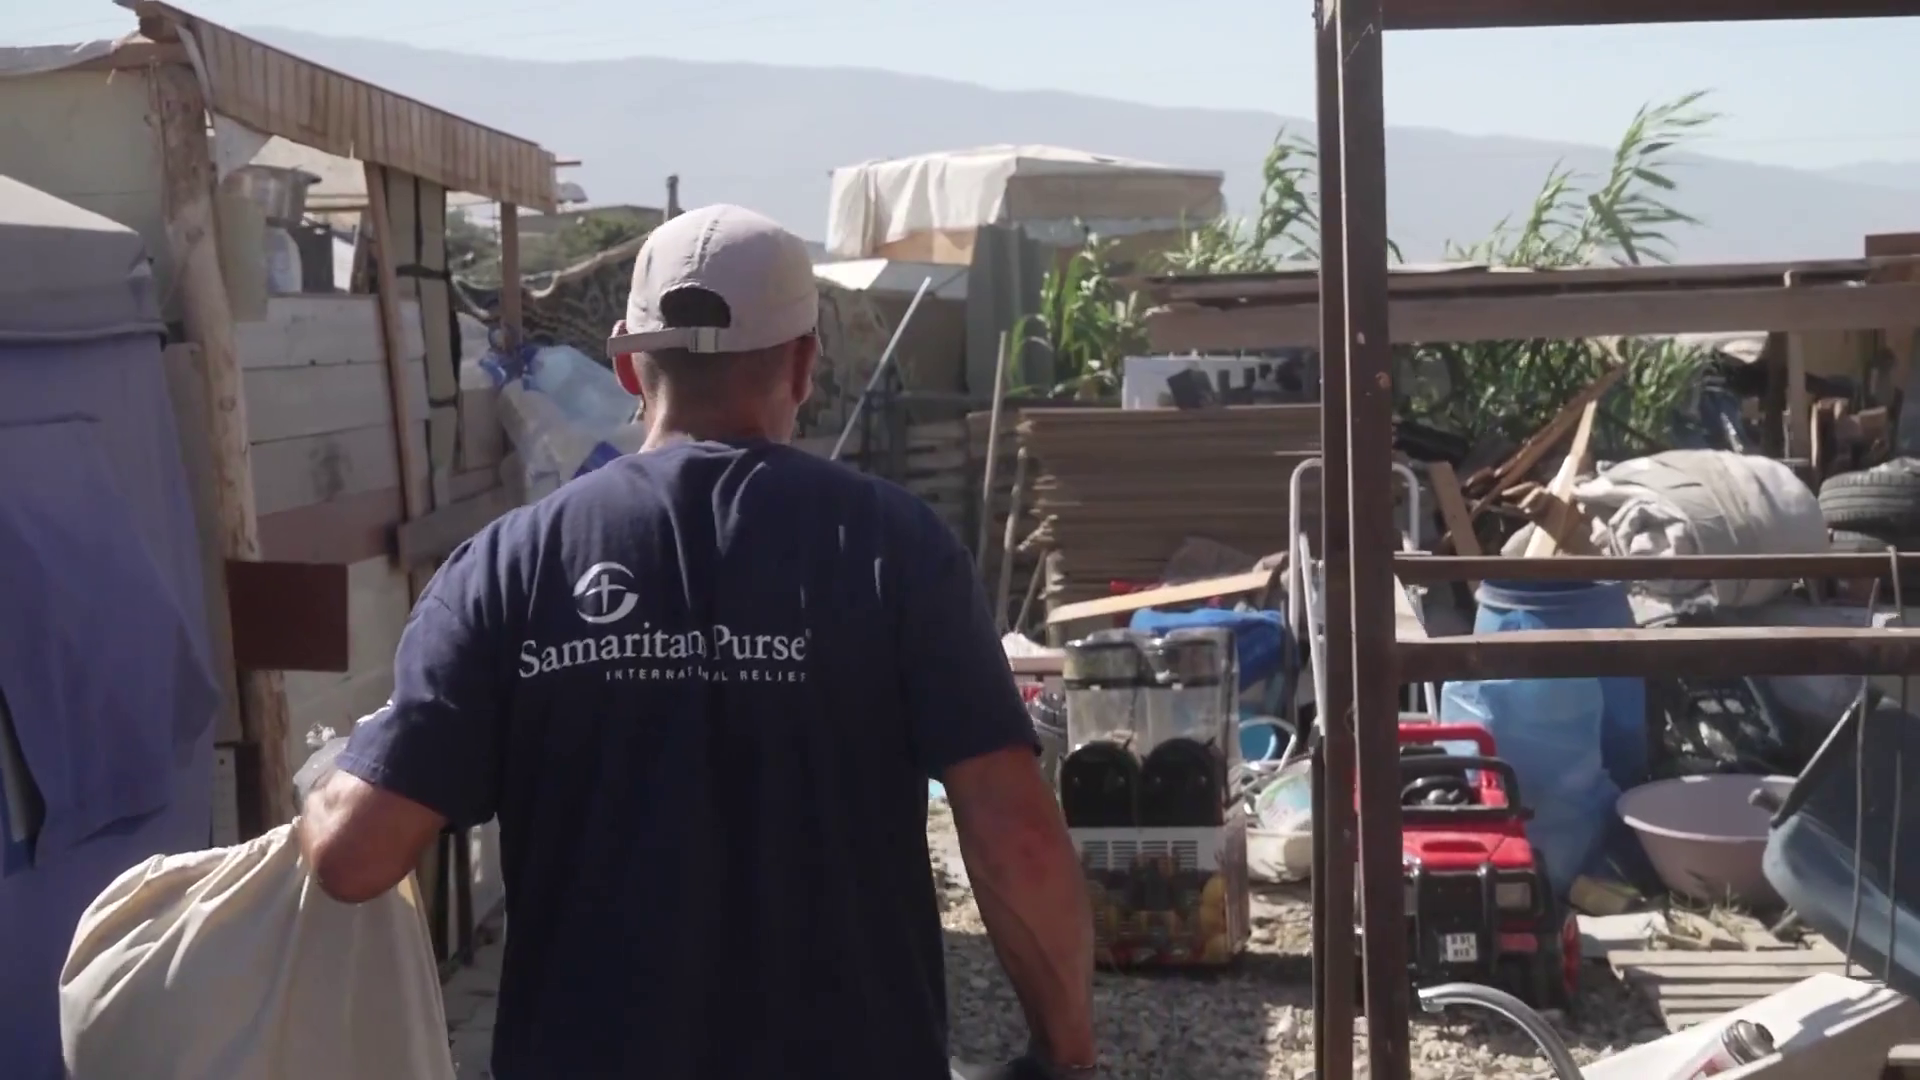 Samaritan’s Purse is providing 21,000 units of refrigerators, fans, and shade kits to earthquake survivors in Turkey who are living in tents.